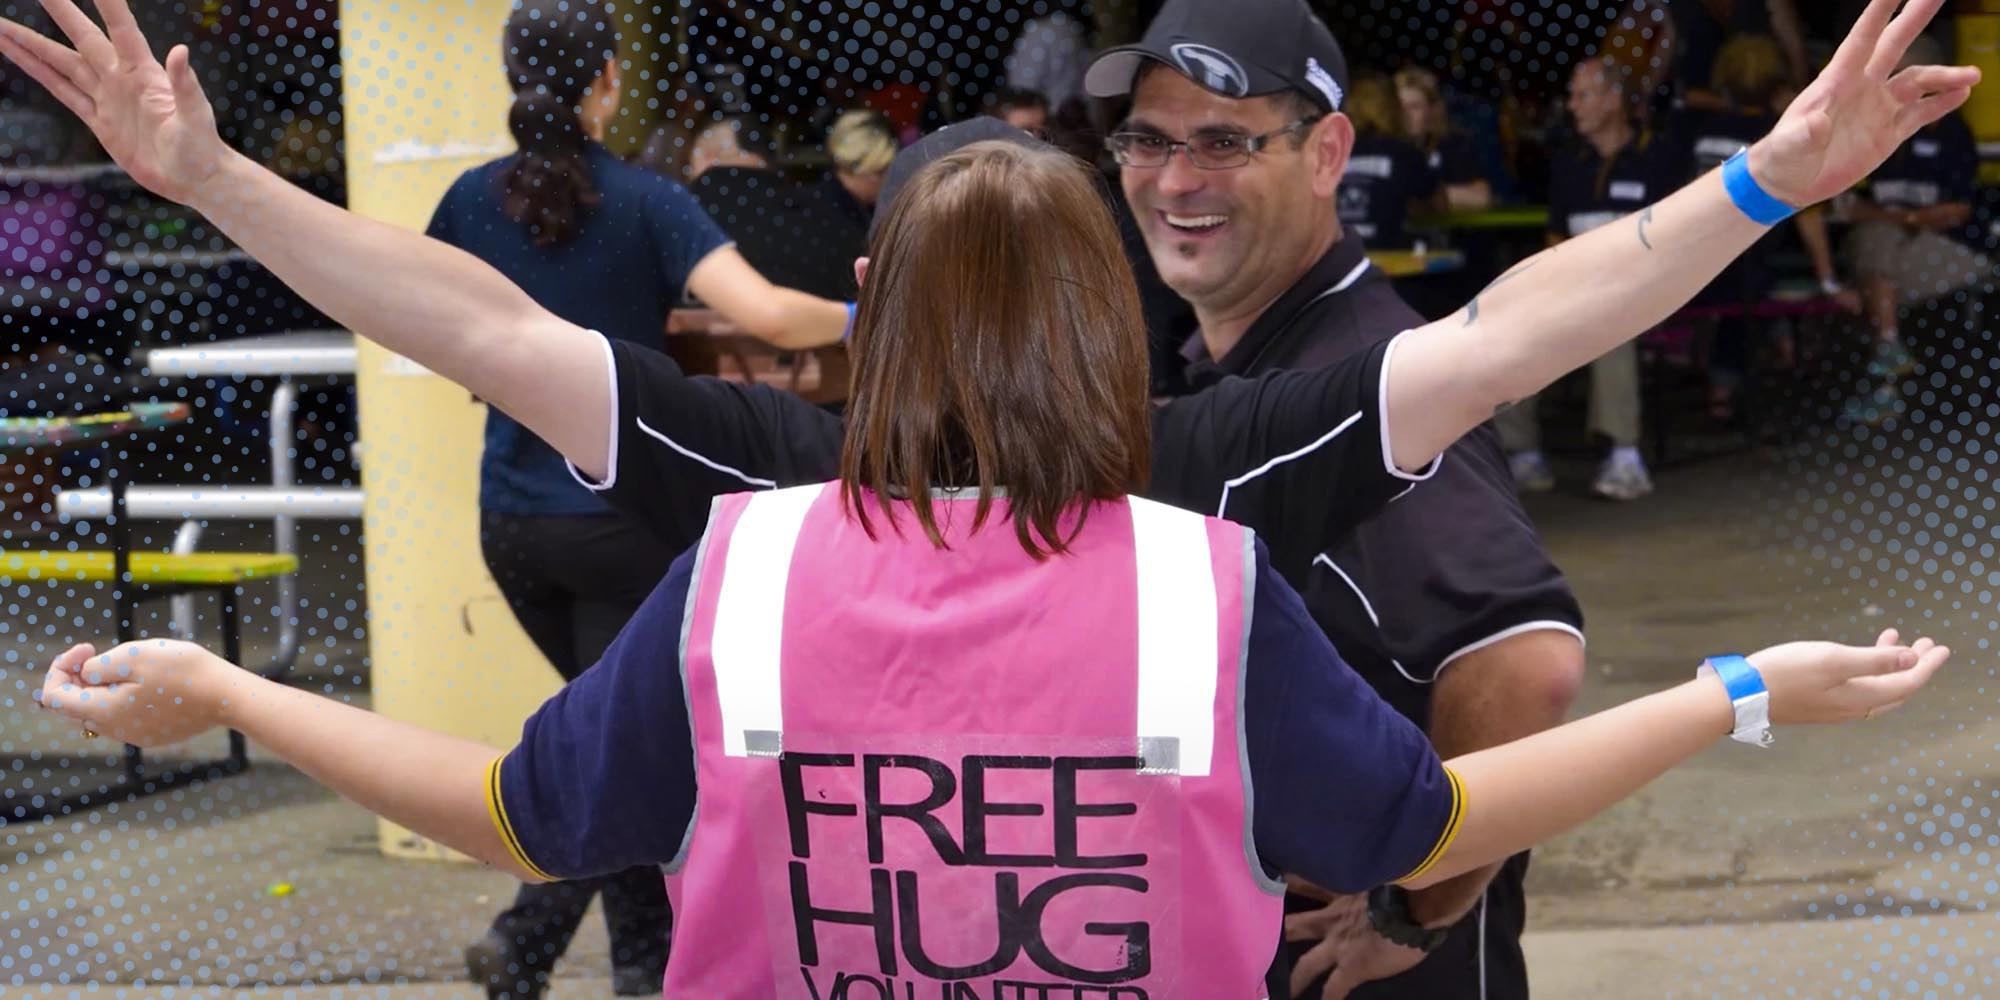 A man and a woman wearing a pink vest that says "Free hugs" 